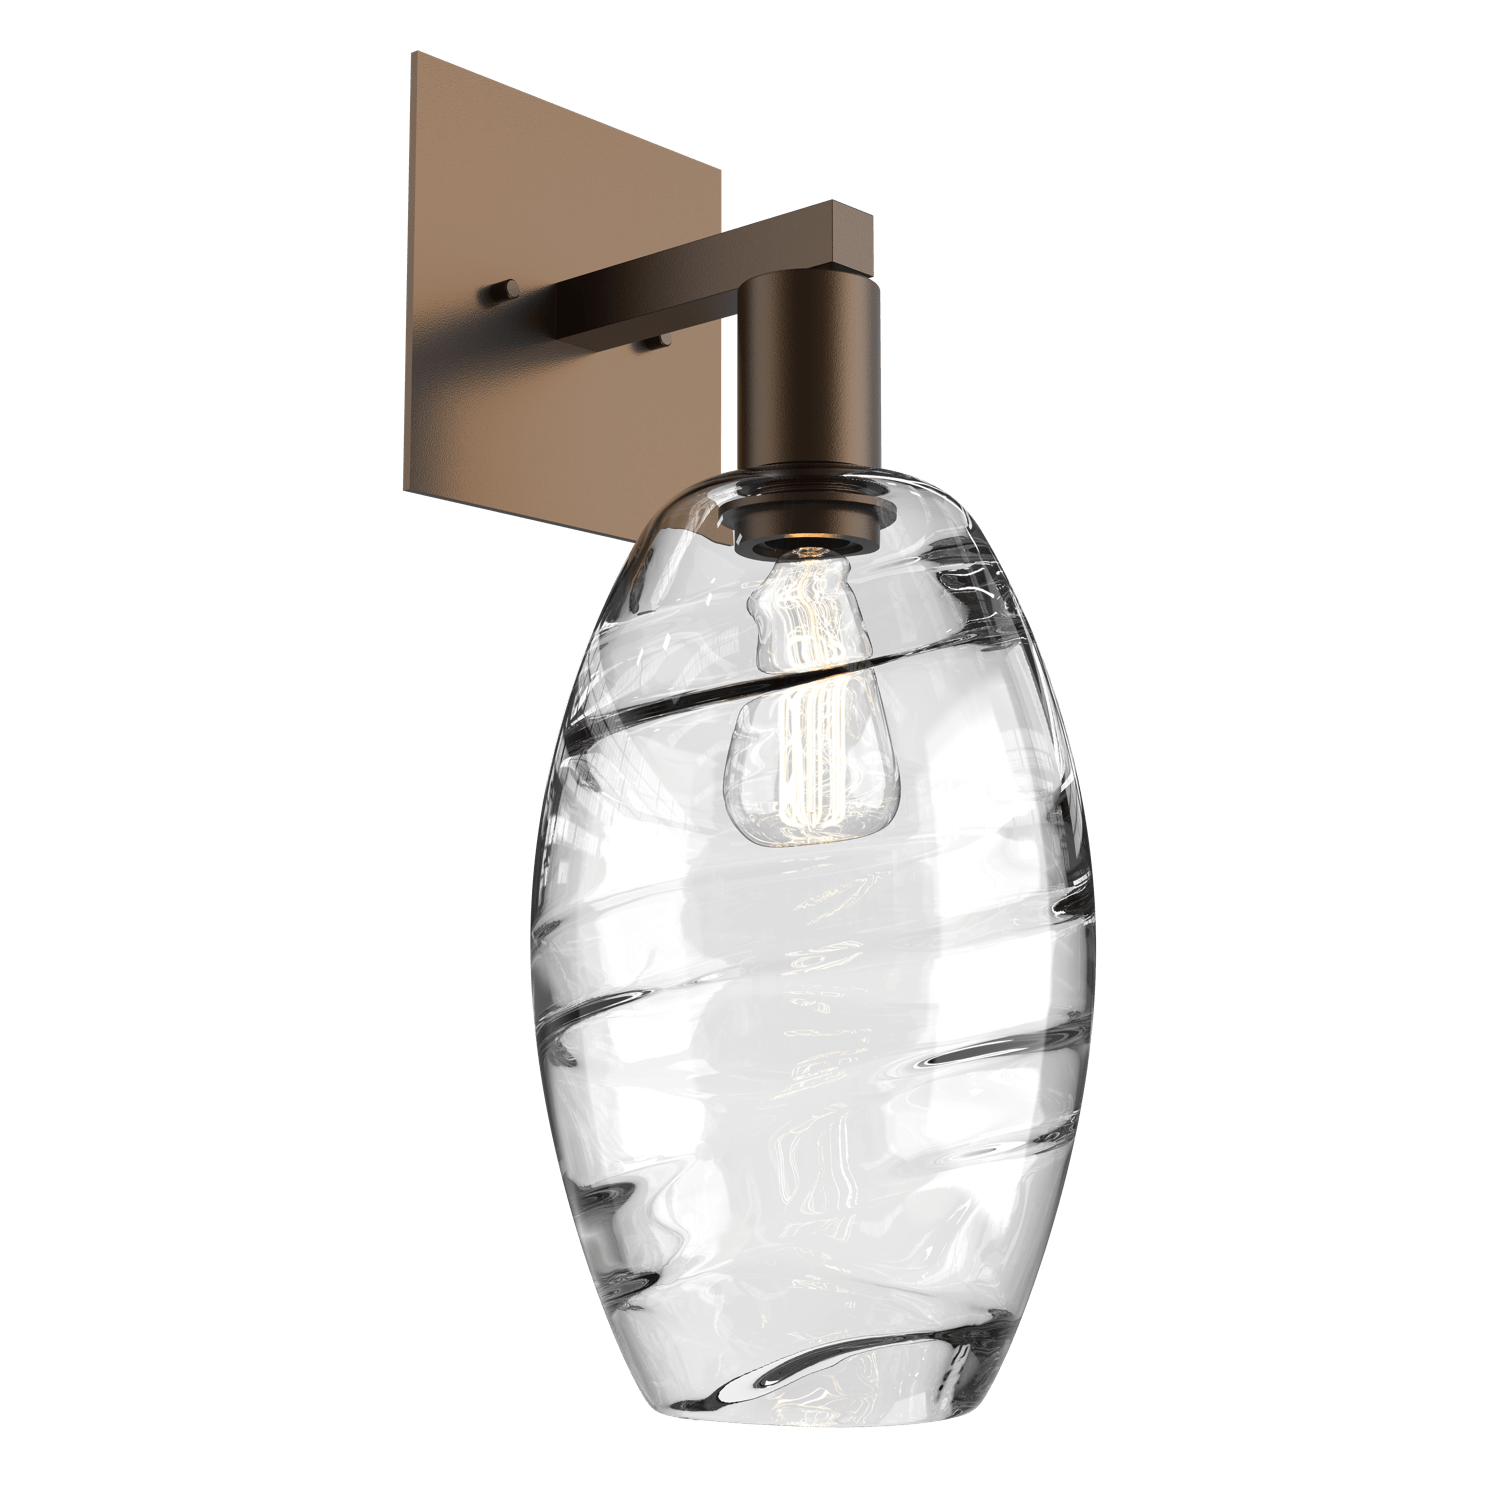 IDB0035-16-FB-OC-Hammerton-Studio-Optic-Blown-Glass-Elisse-wall-sconce-with-flat-bronze-finish-and-optic-clear-blown-glass-shades-and-incandescent-lamping